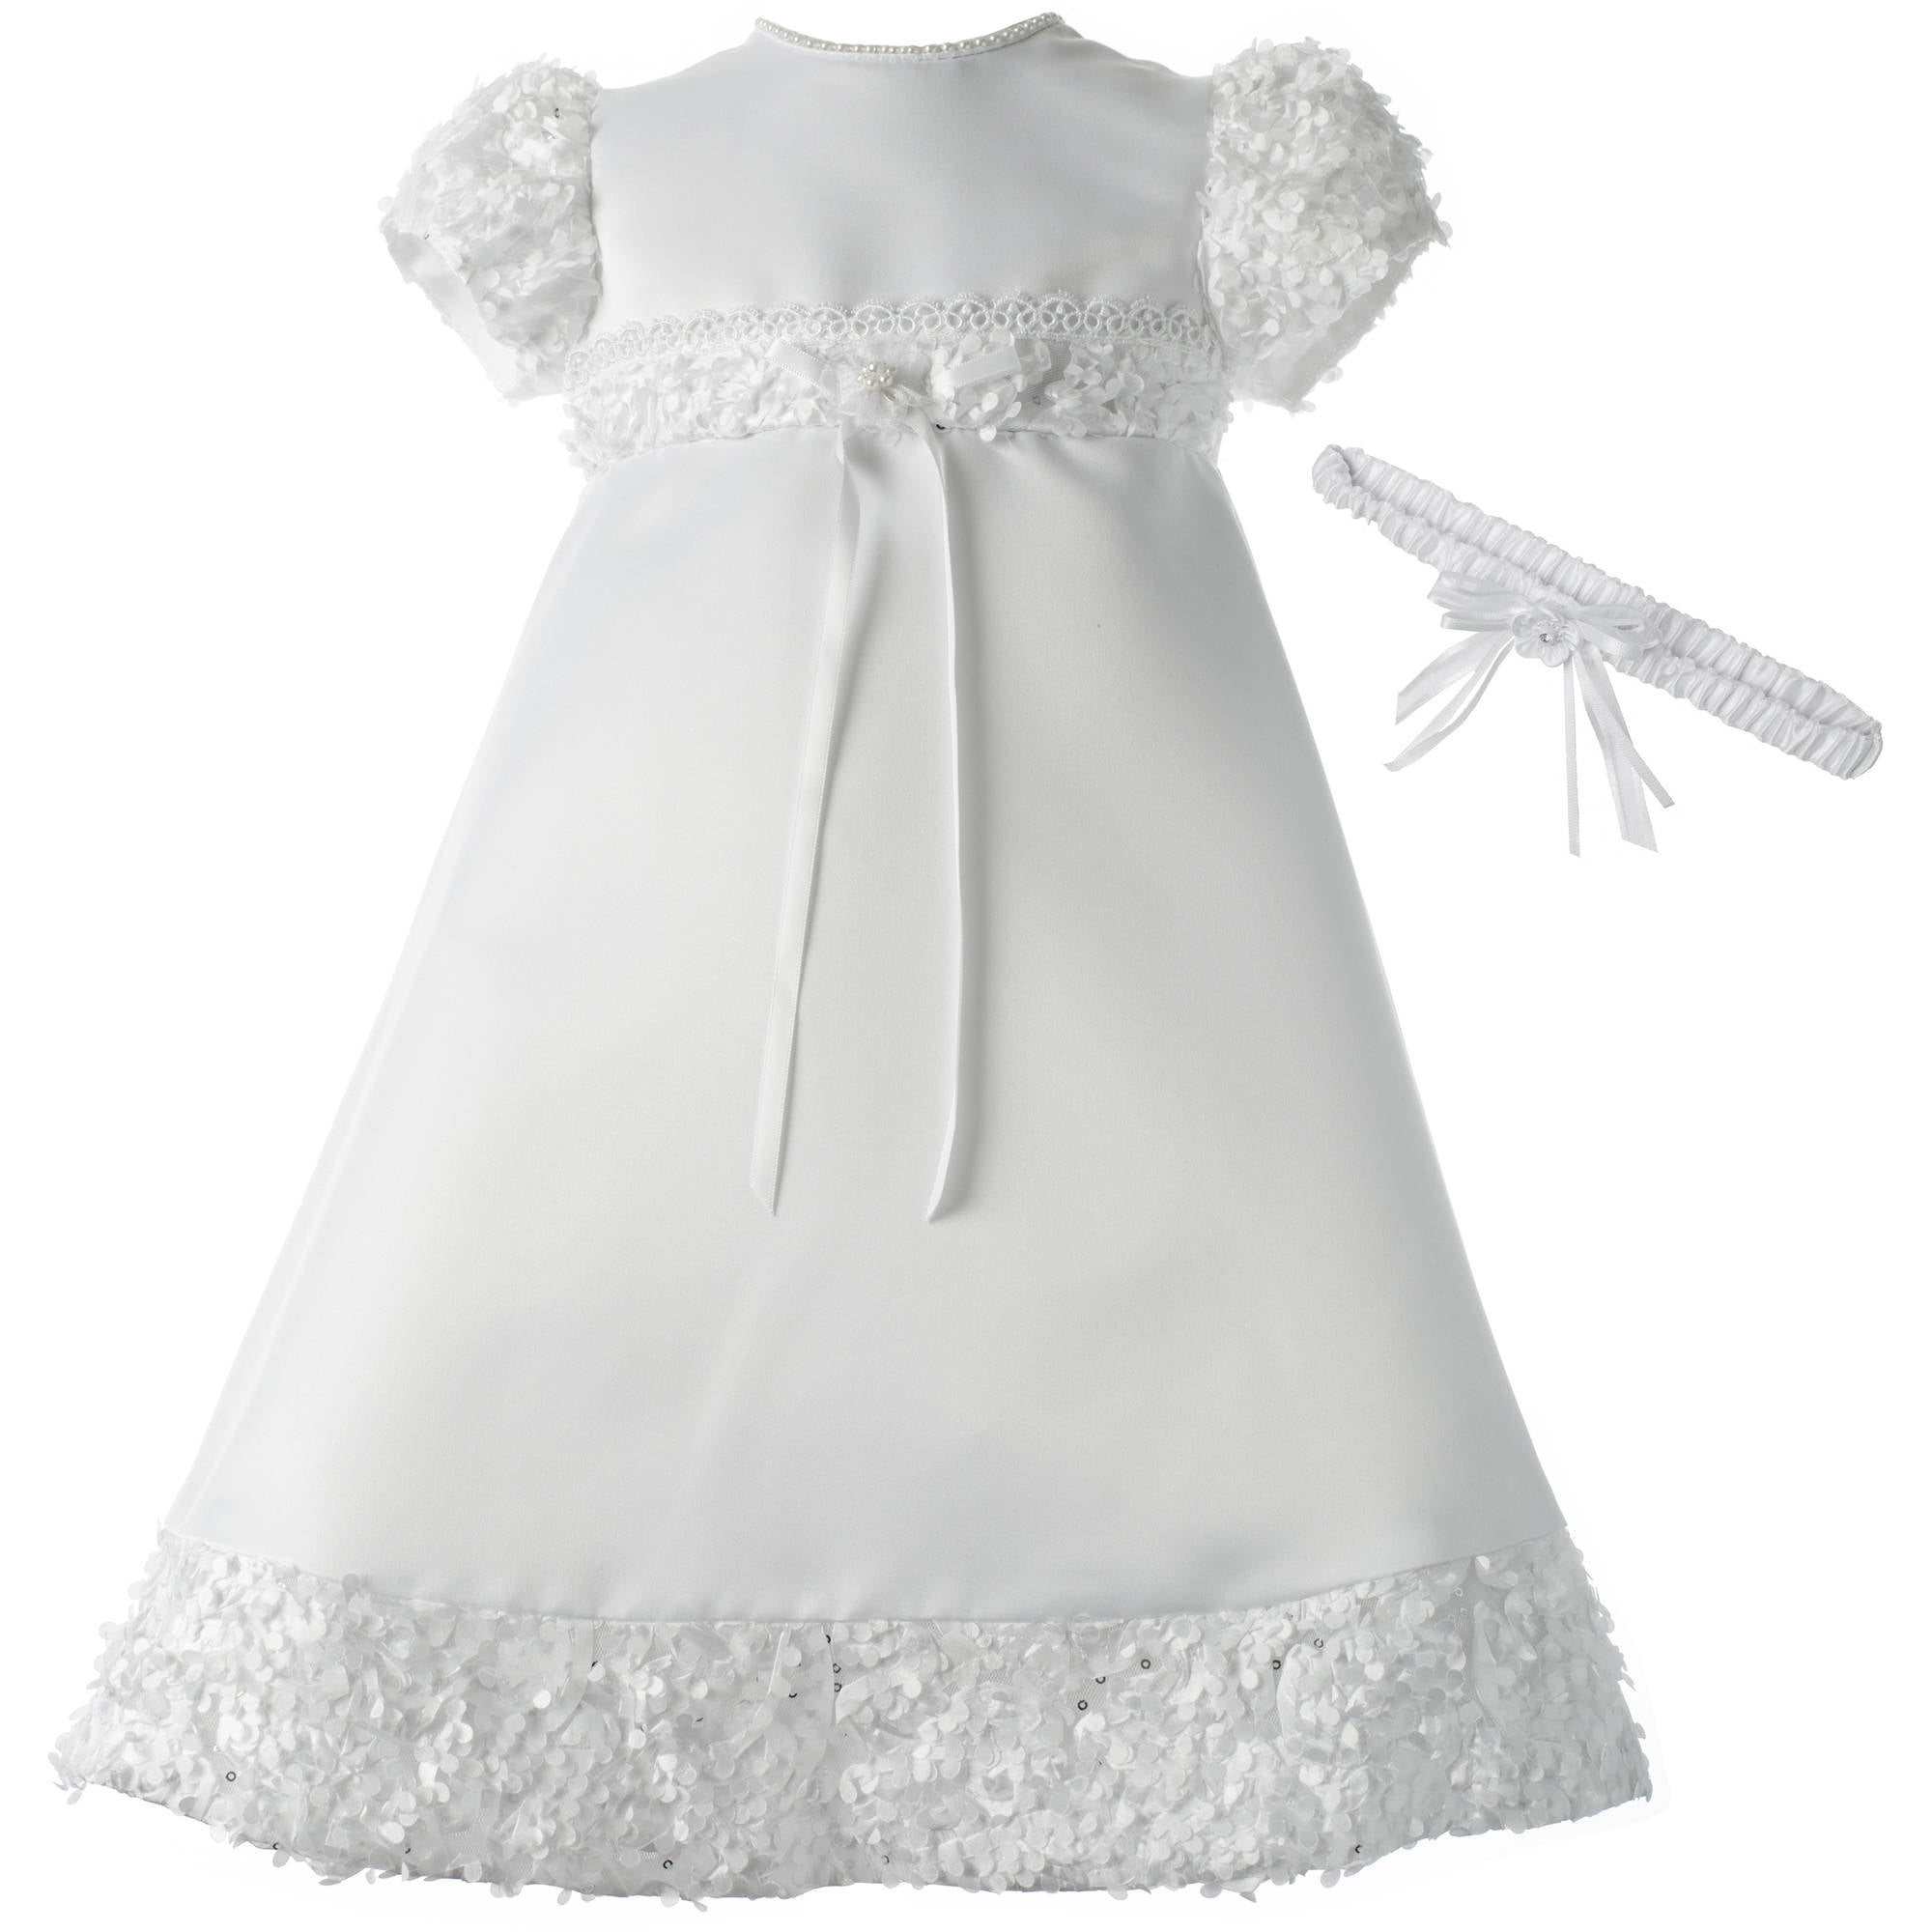 Glamulice Baby-Girls Newborn Satin Christening Baptism Floral Embroidered Dress Gown Outfit